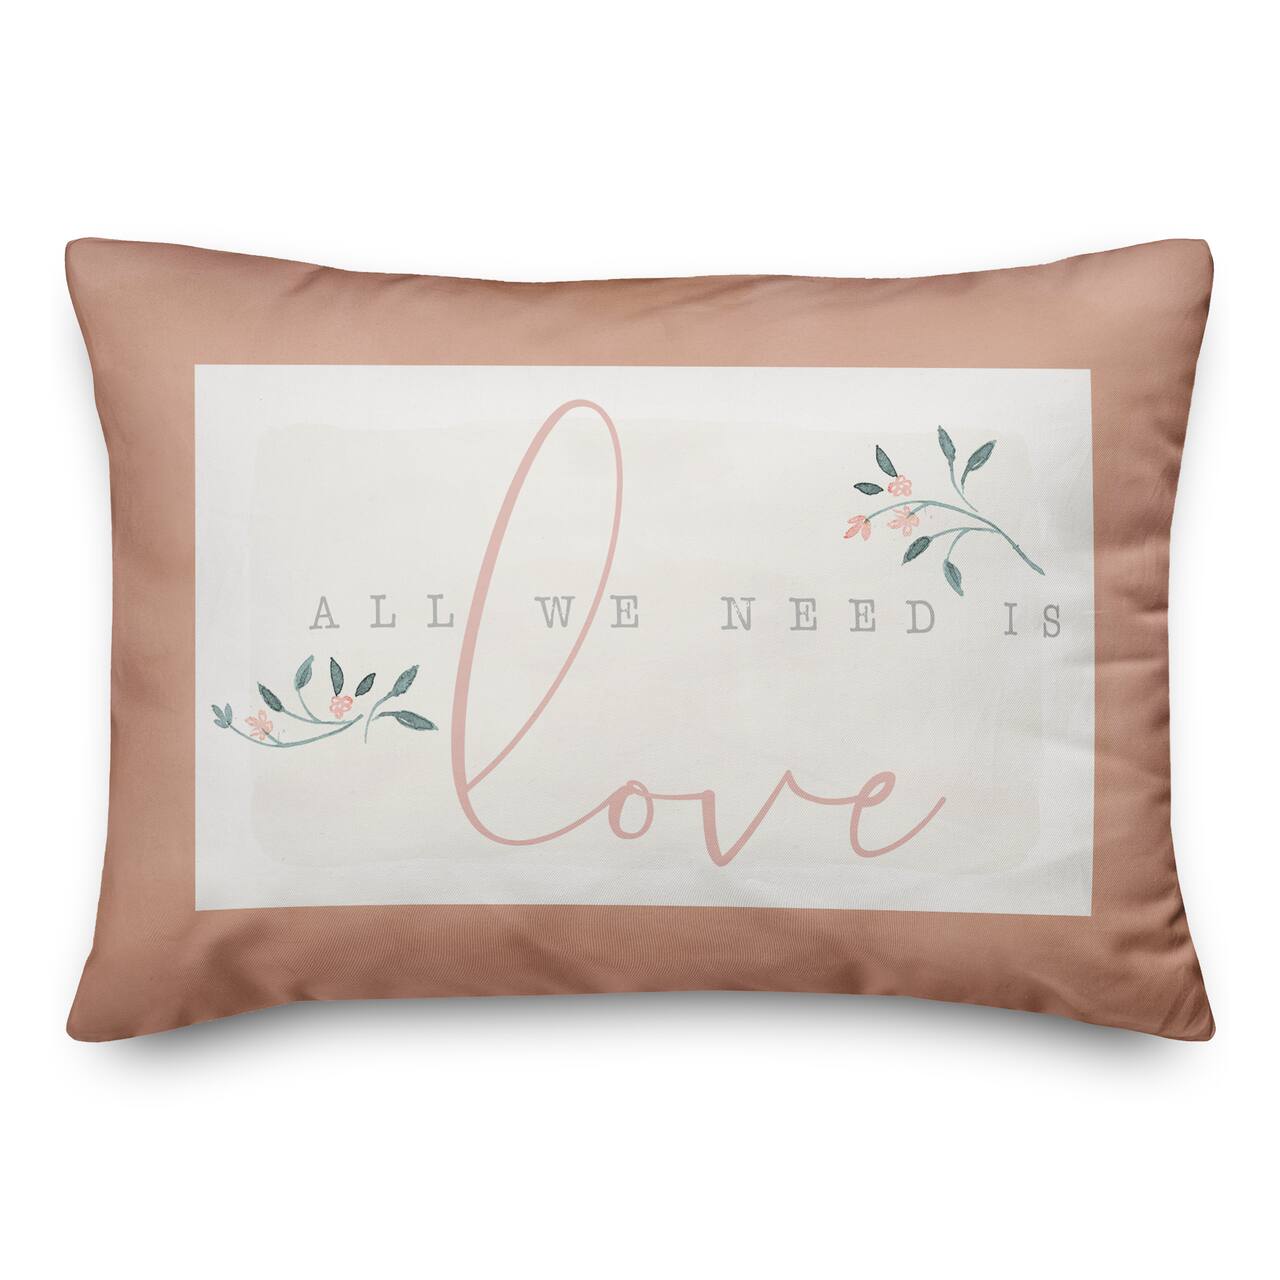 All We Need Is Love Throw Pillow